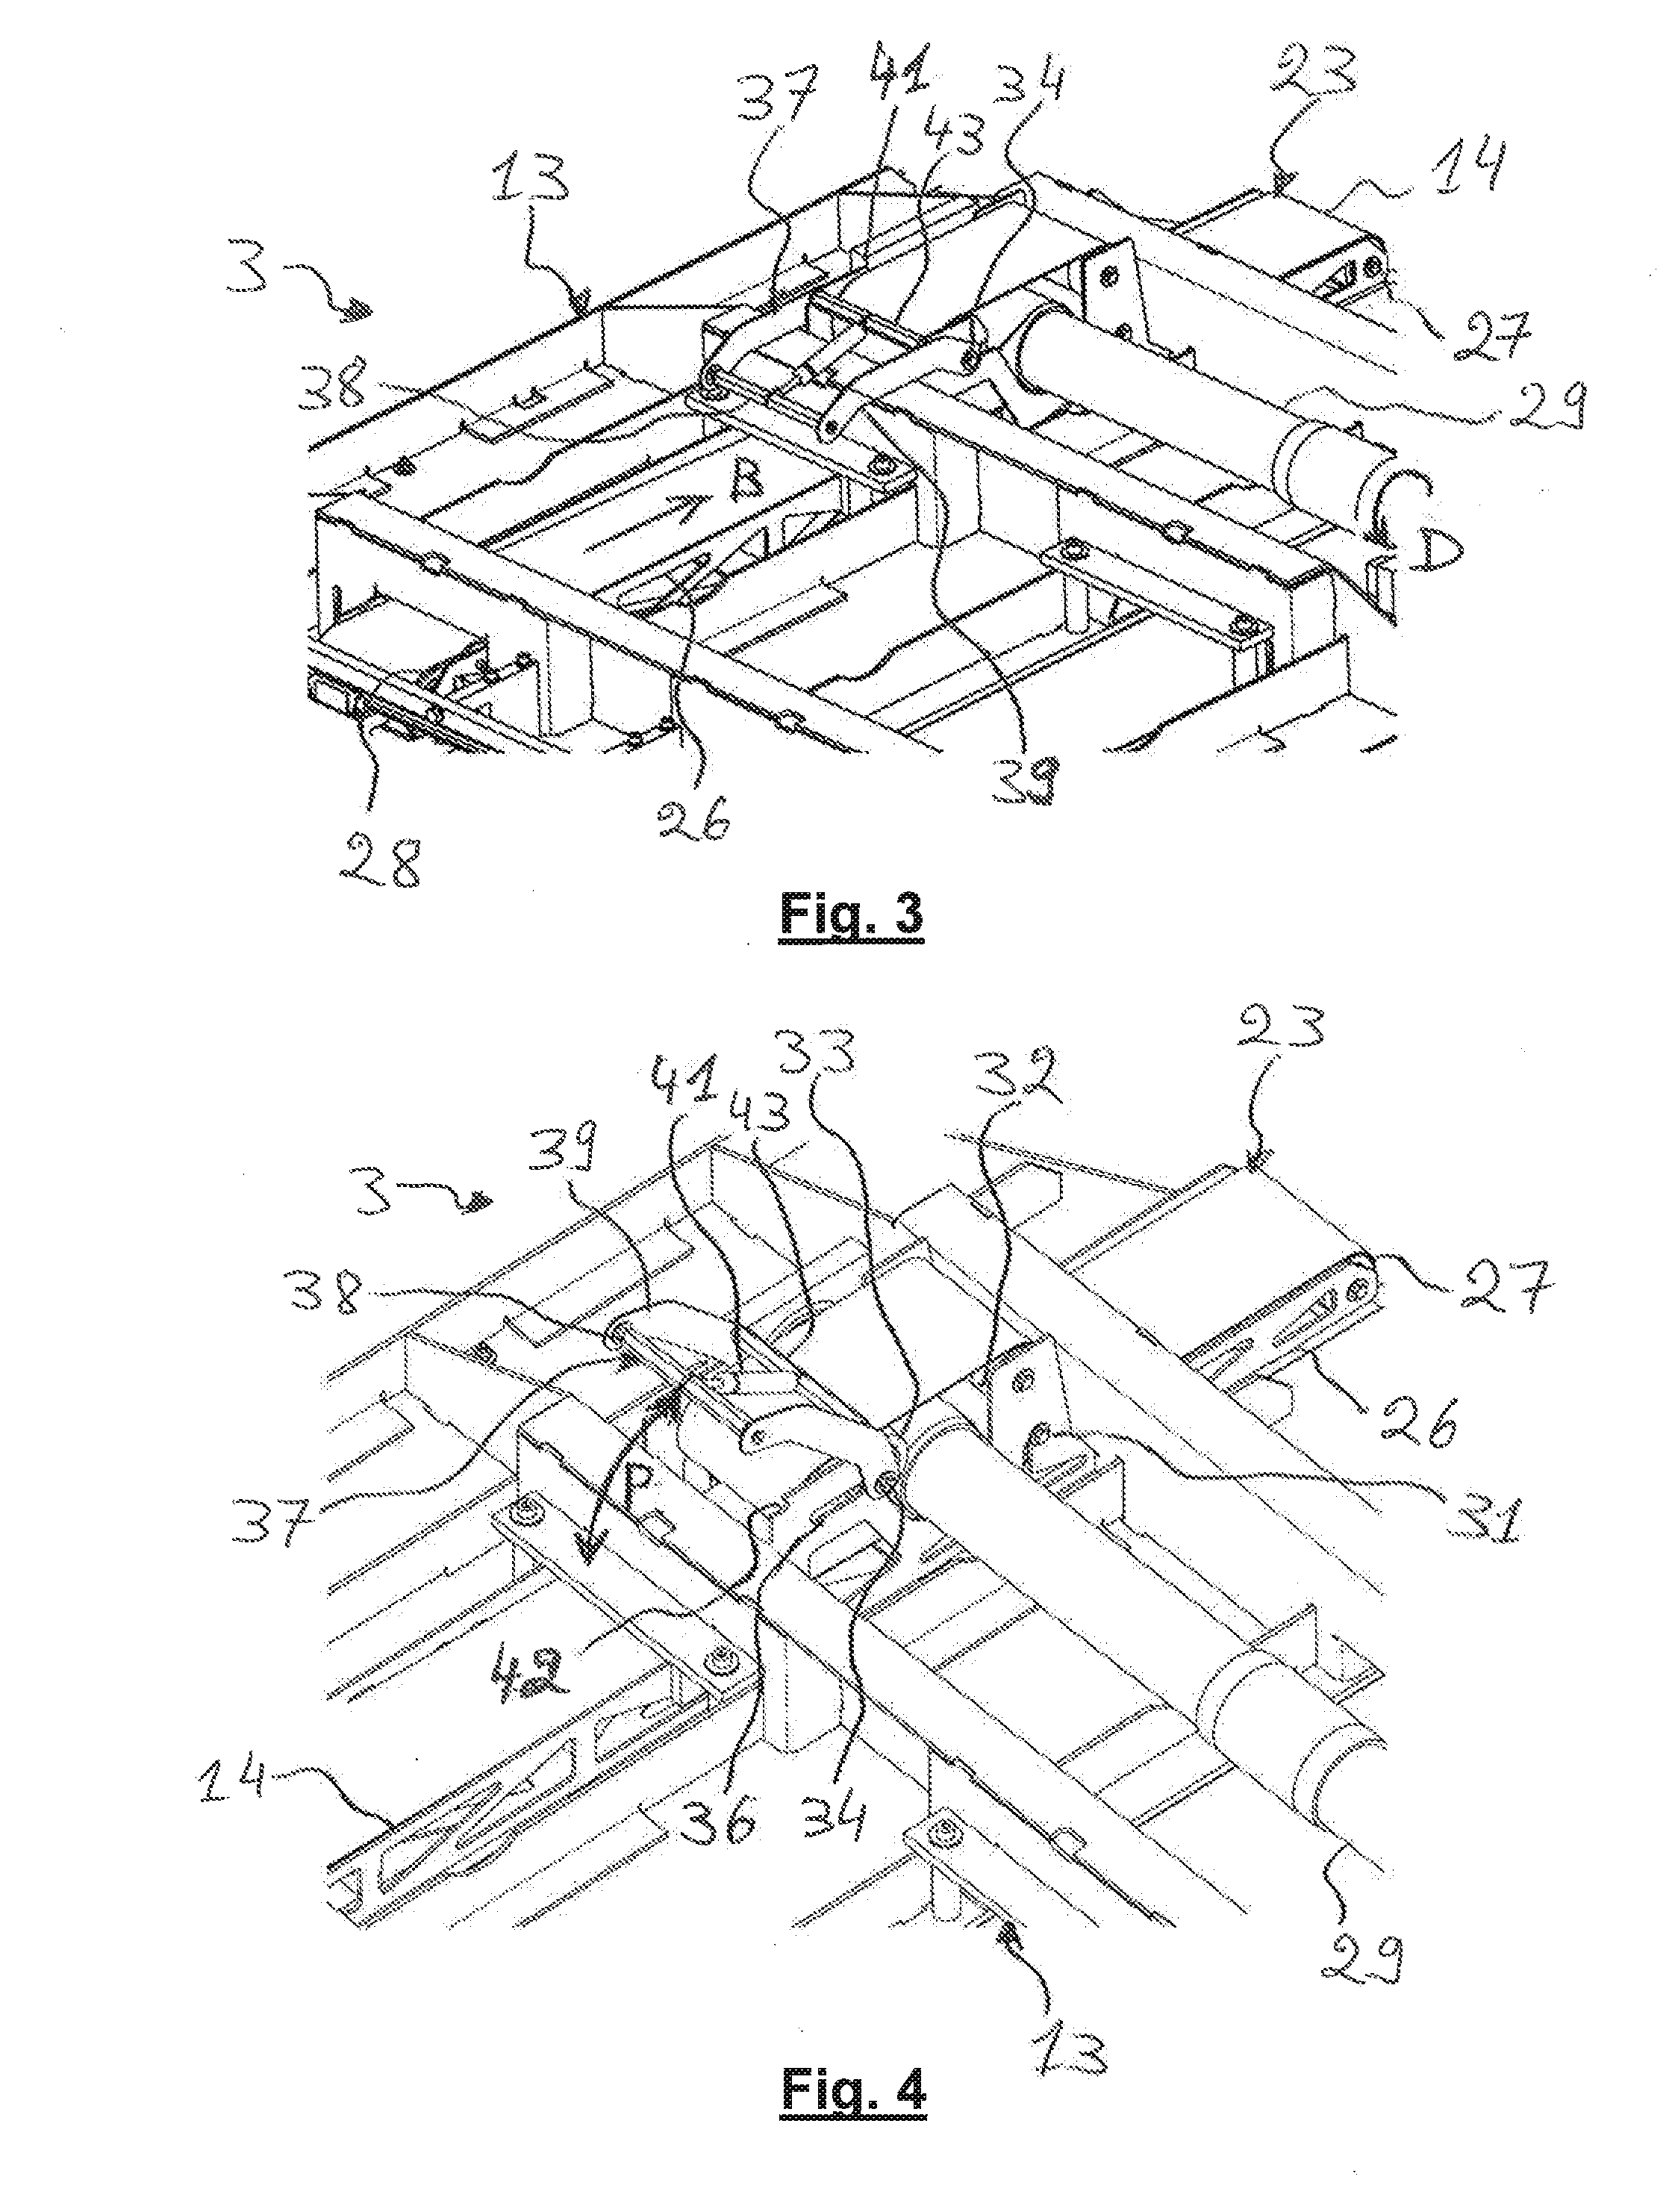 Machine for processing elements in sheet form, including a feed board fitted with conveying means